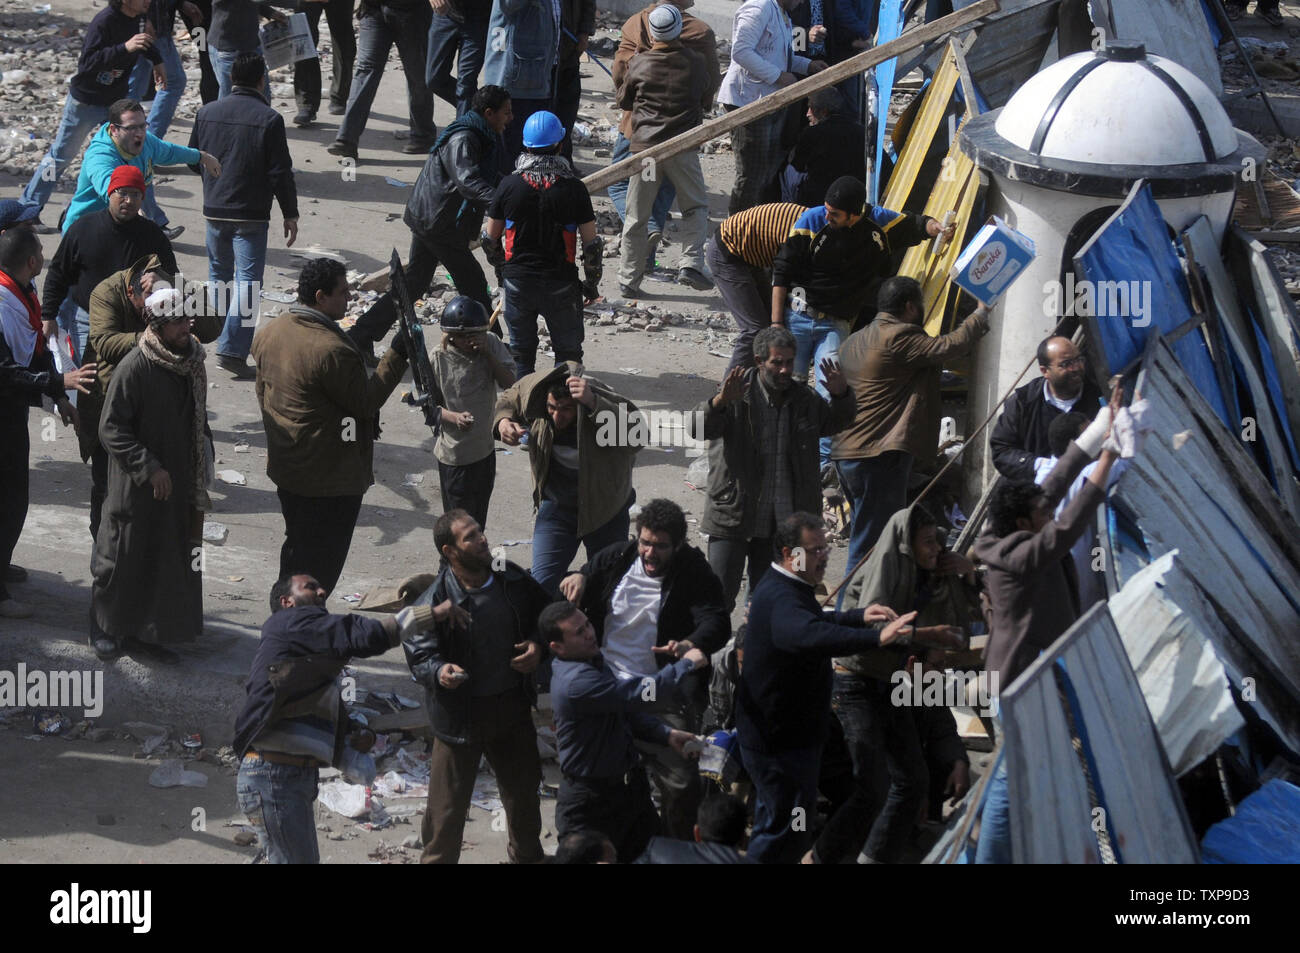 Clashes continue between anti-government demonstrators and their pro-government opponents in Cairo's Tahrir square on February 03, 2011. This is the 10th day of protests calling for the ouster of embattled President Hosni Mubarak.  UPI Stock Photo